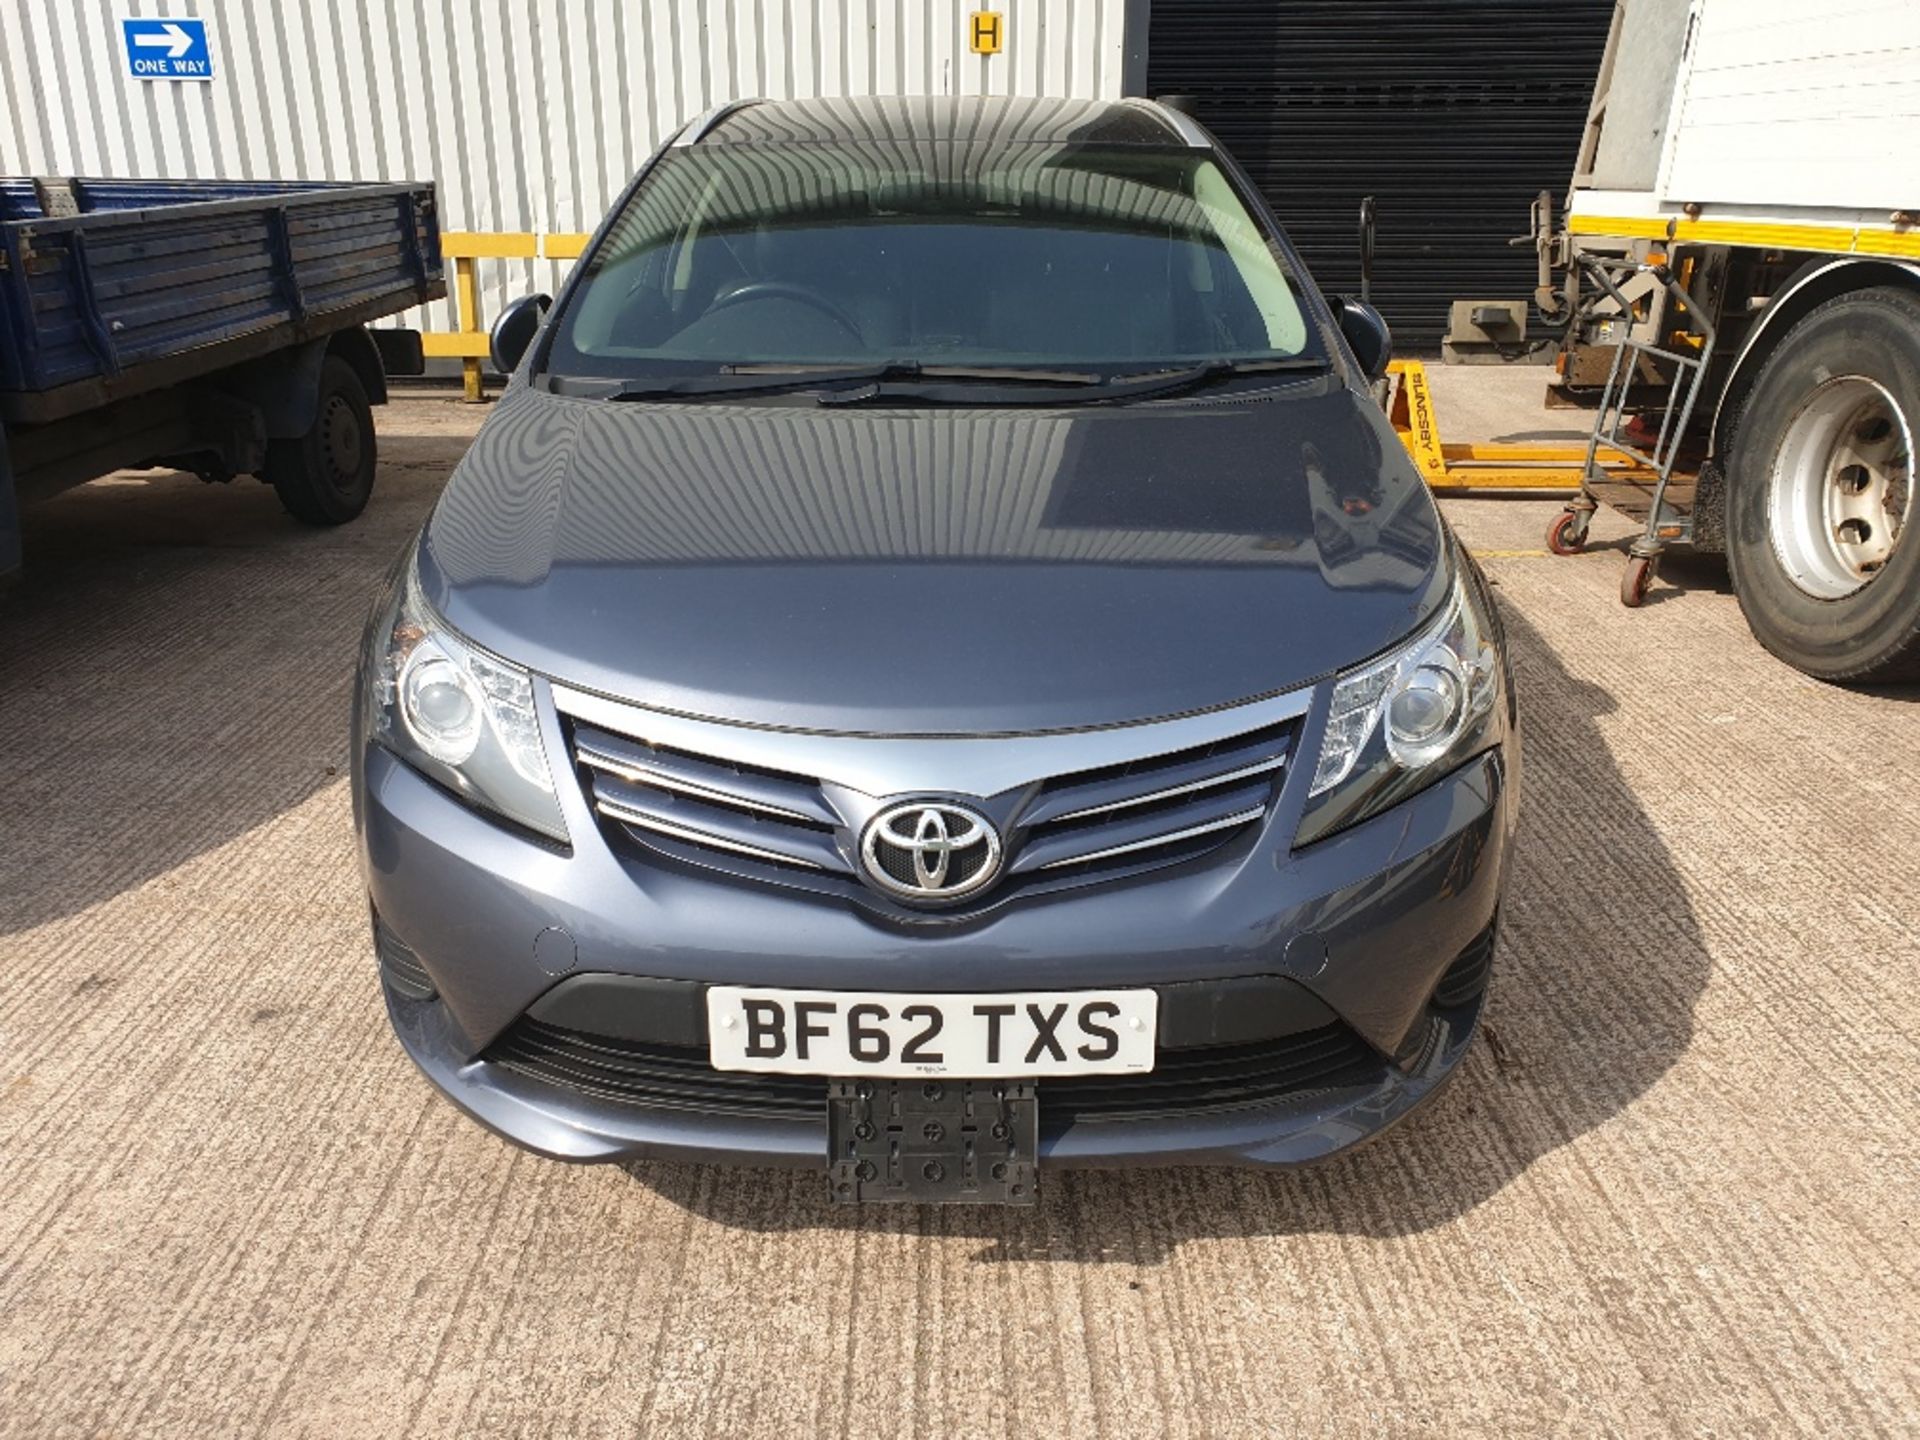 TOYOTA AVENSIS T SPIRIT D-4D - DIESEL Reg: BF62 TXS, Mileage: UNKNOWN Details: FIRST REGISTERED 27/ - Image 5 of 6